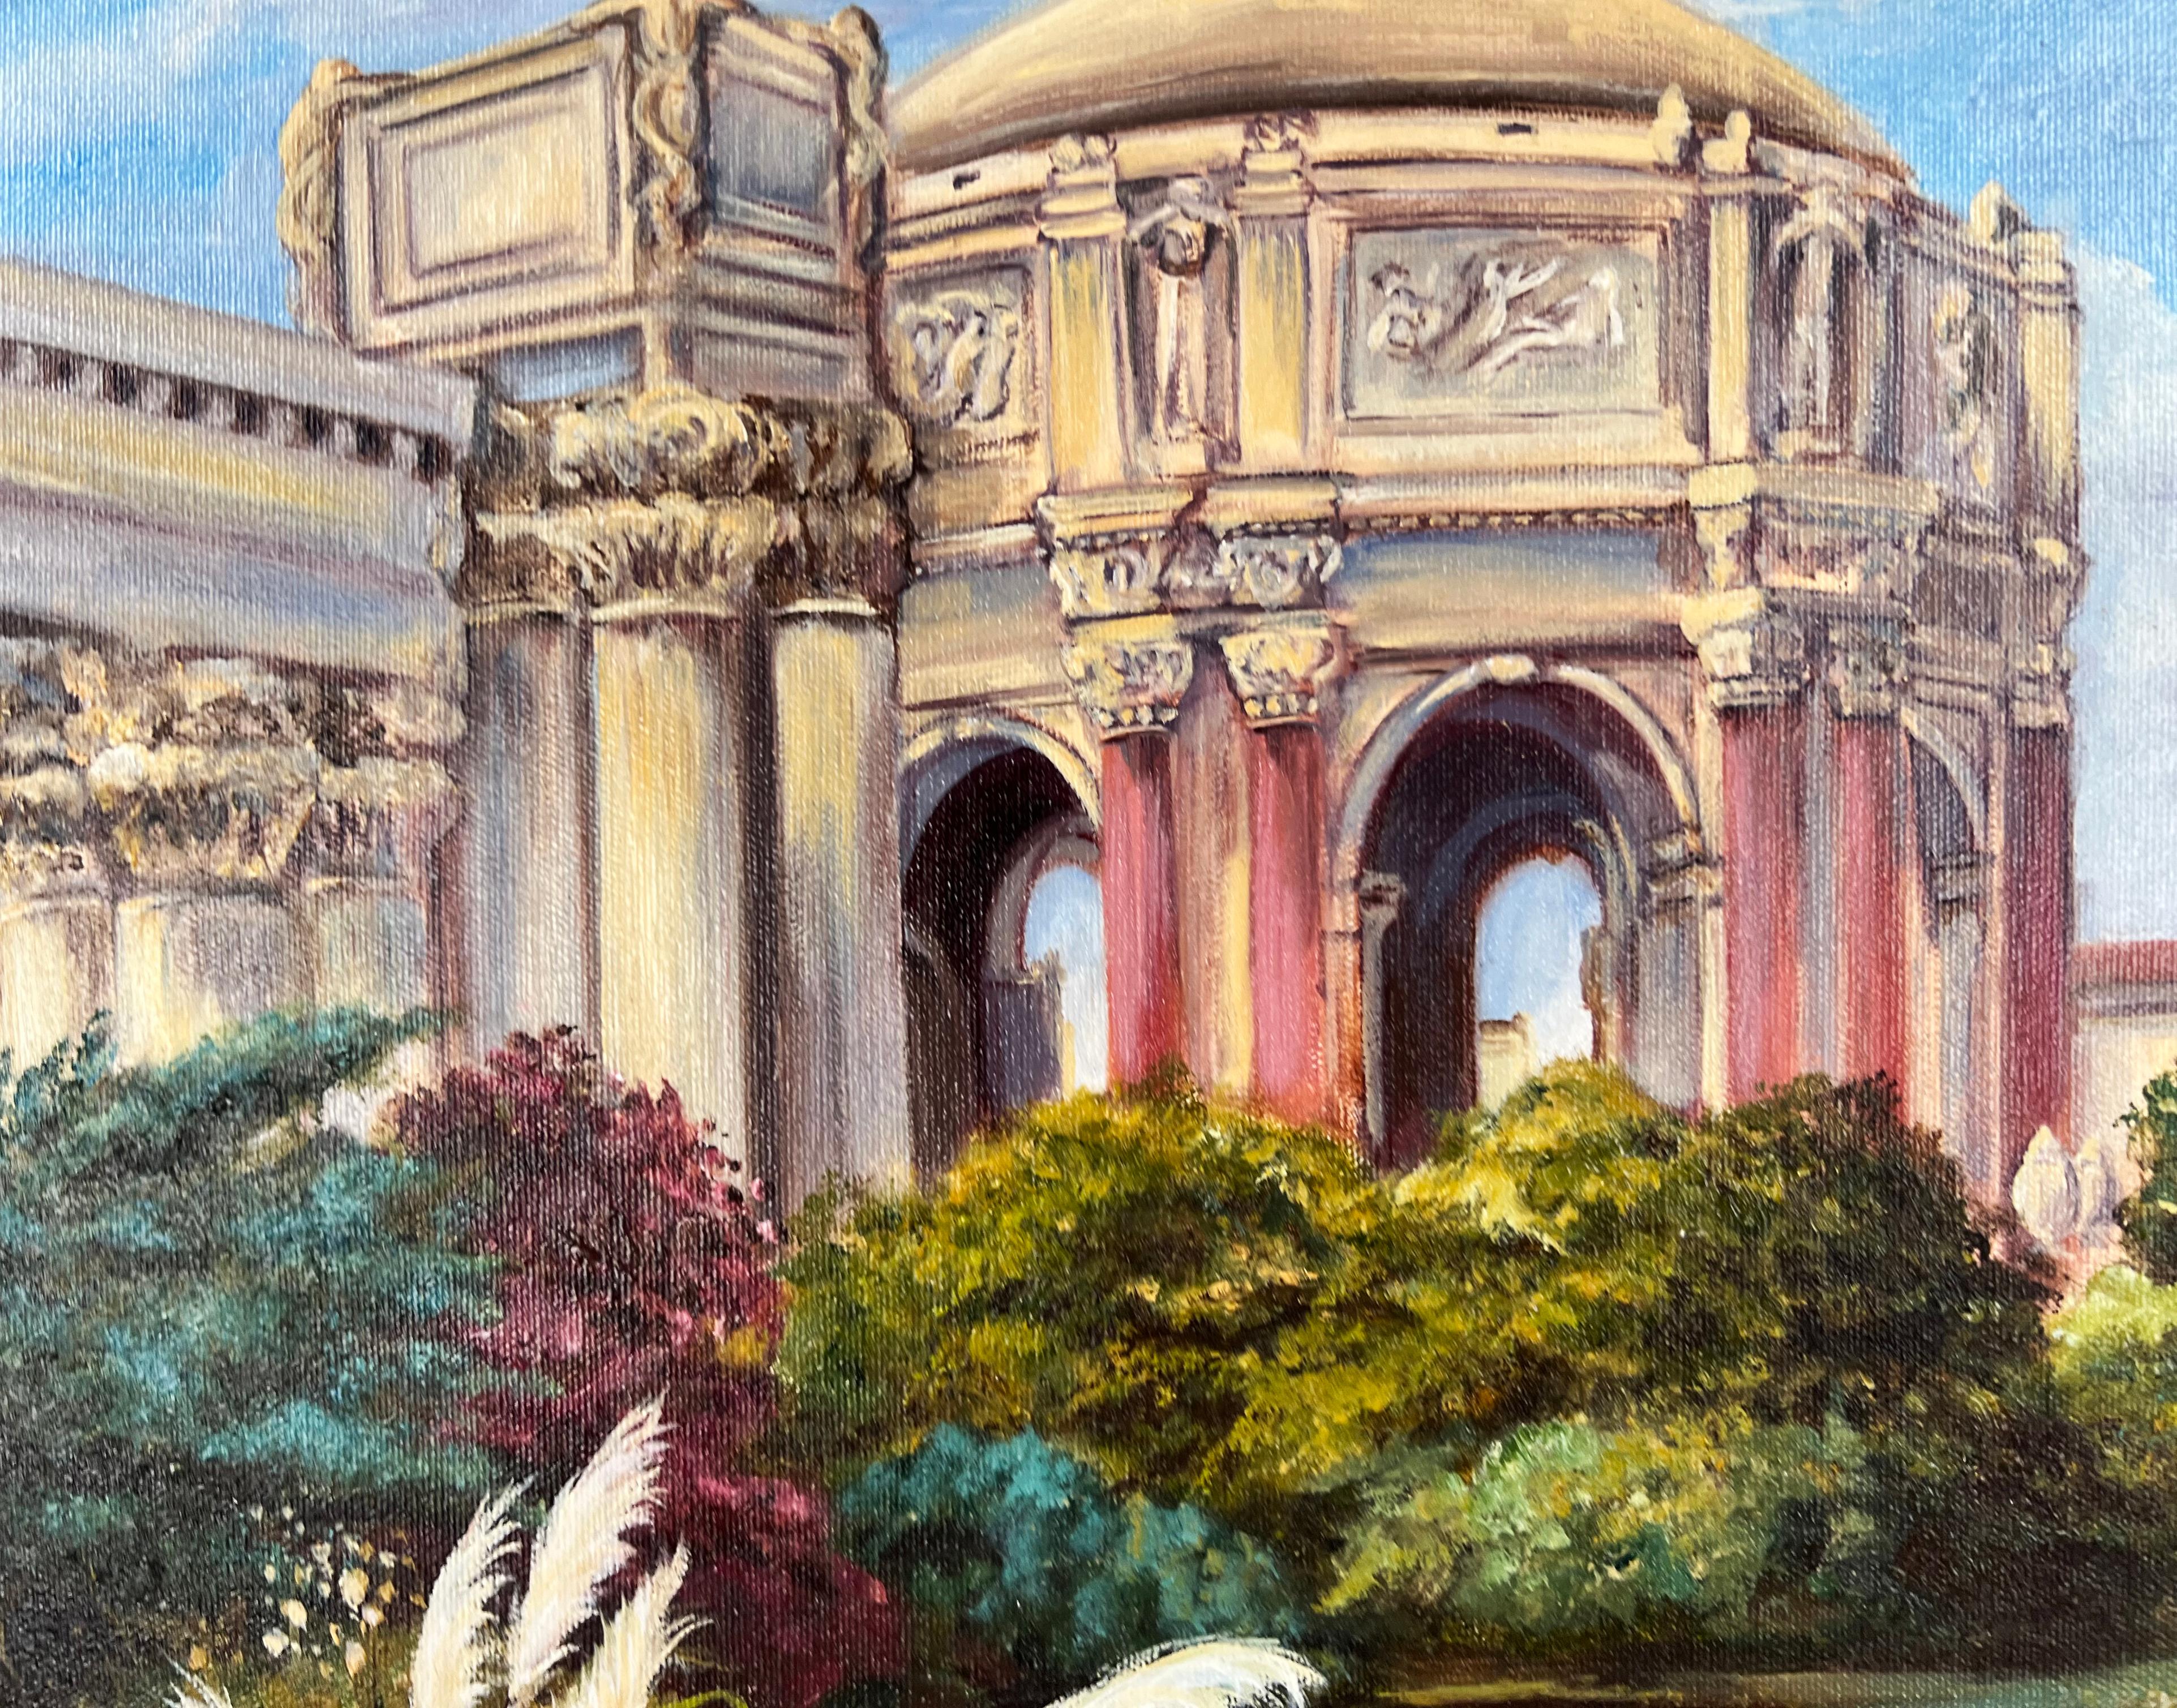 San Francisco Palace of Fine Arts Oil on Canvas
Palace of Fine Arts by San Francisco native Leonida Louise (Bertone) Ivanetich (American, b-1941), migratory birds fly over head an alight in the Marina watershed on a cool San Francisco evening.